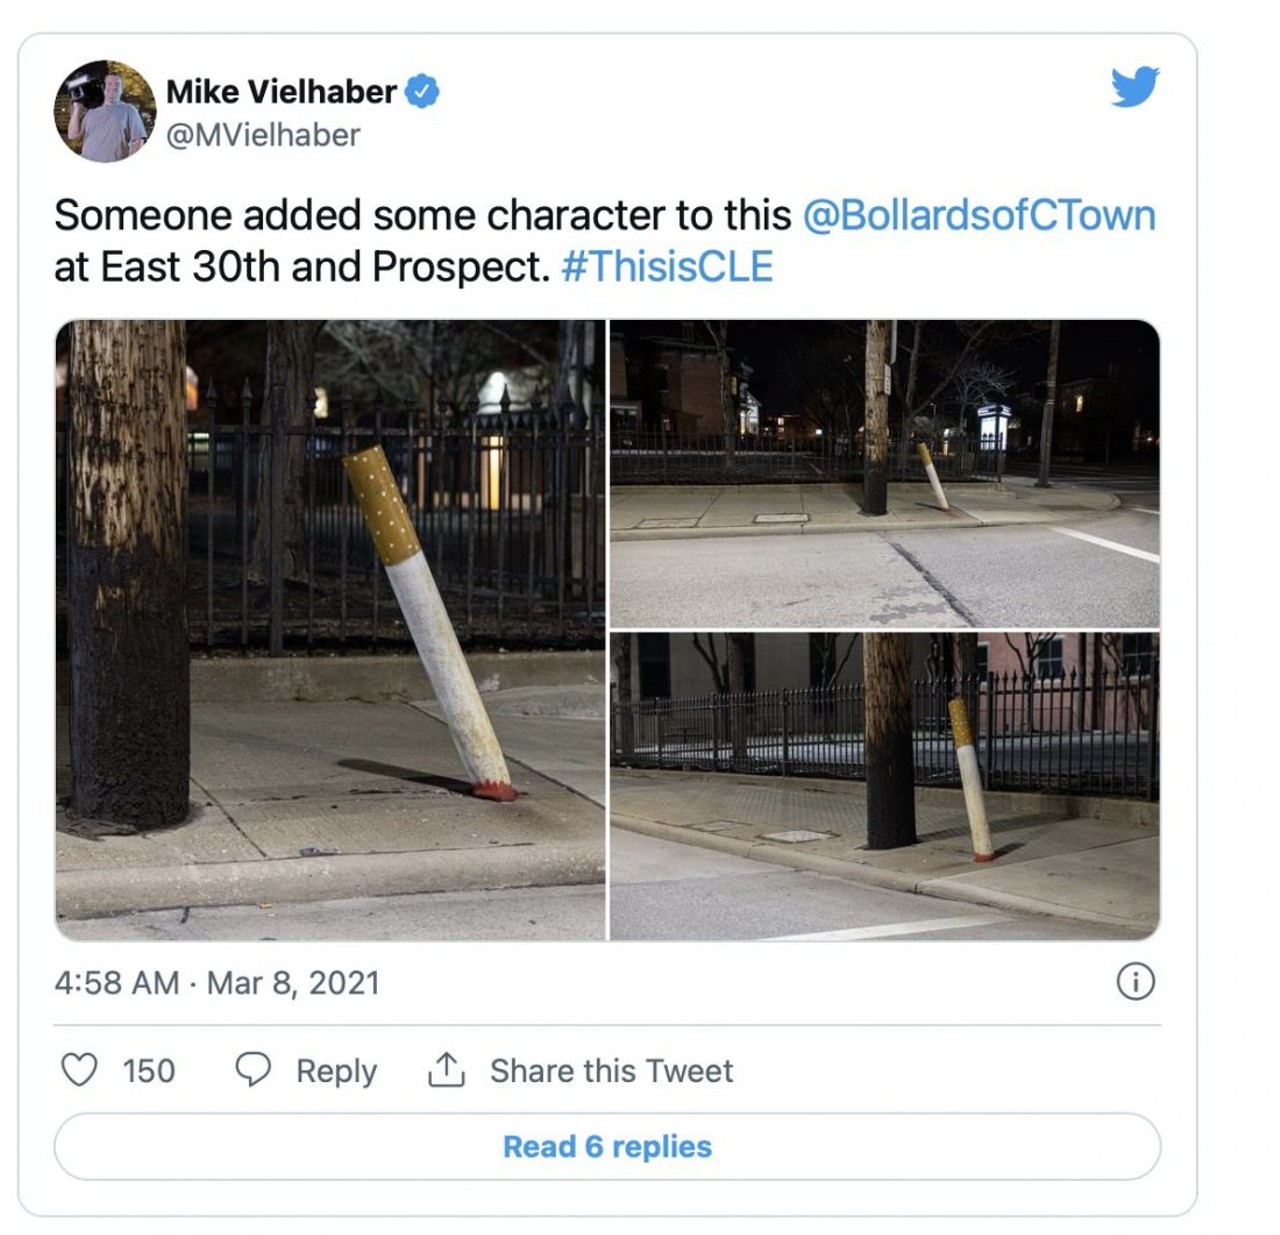  &#147;Behold This Cleveland Bollard Art&#148;
March 9th 
&#147;Captured by ace WEWS overnight news photographer Mike Vielhaber, this ingenious rogue bollard art can be seen at the corner of East 30th and Prospect. Bollard art!&#148;